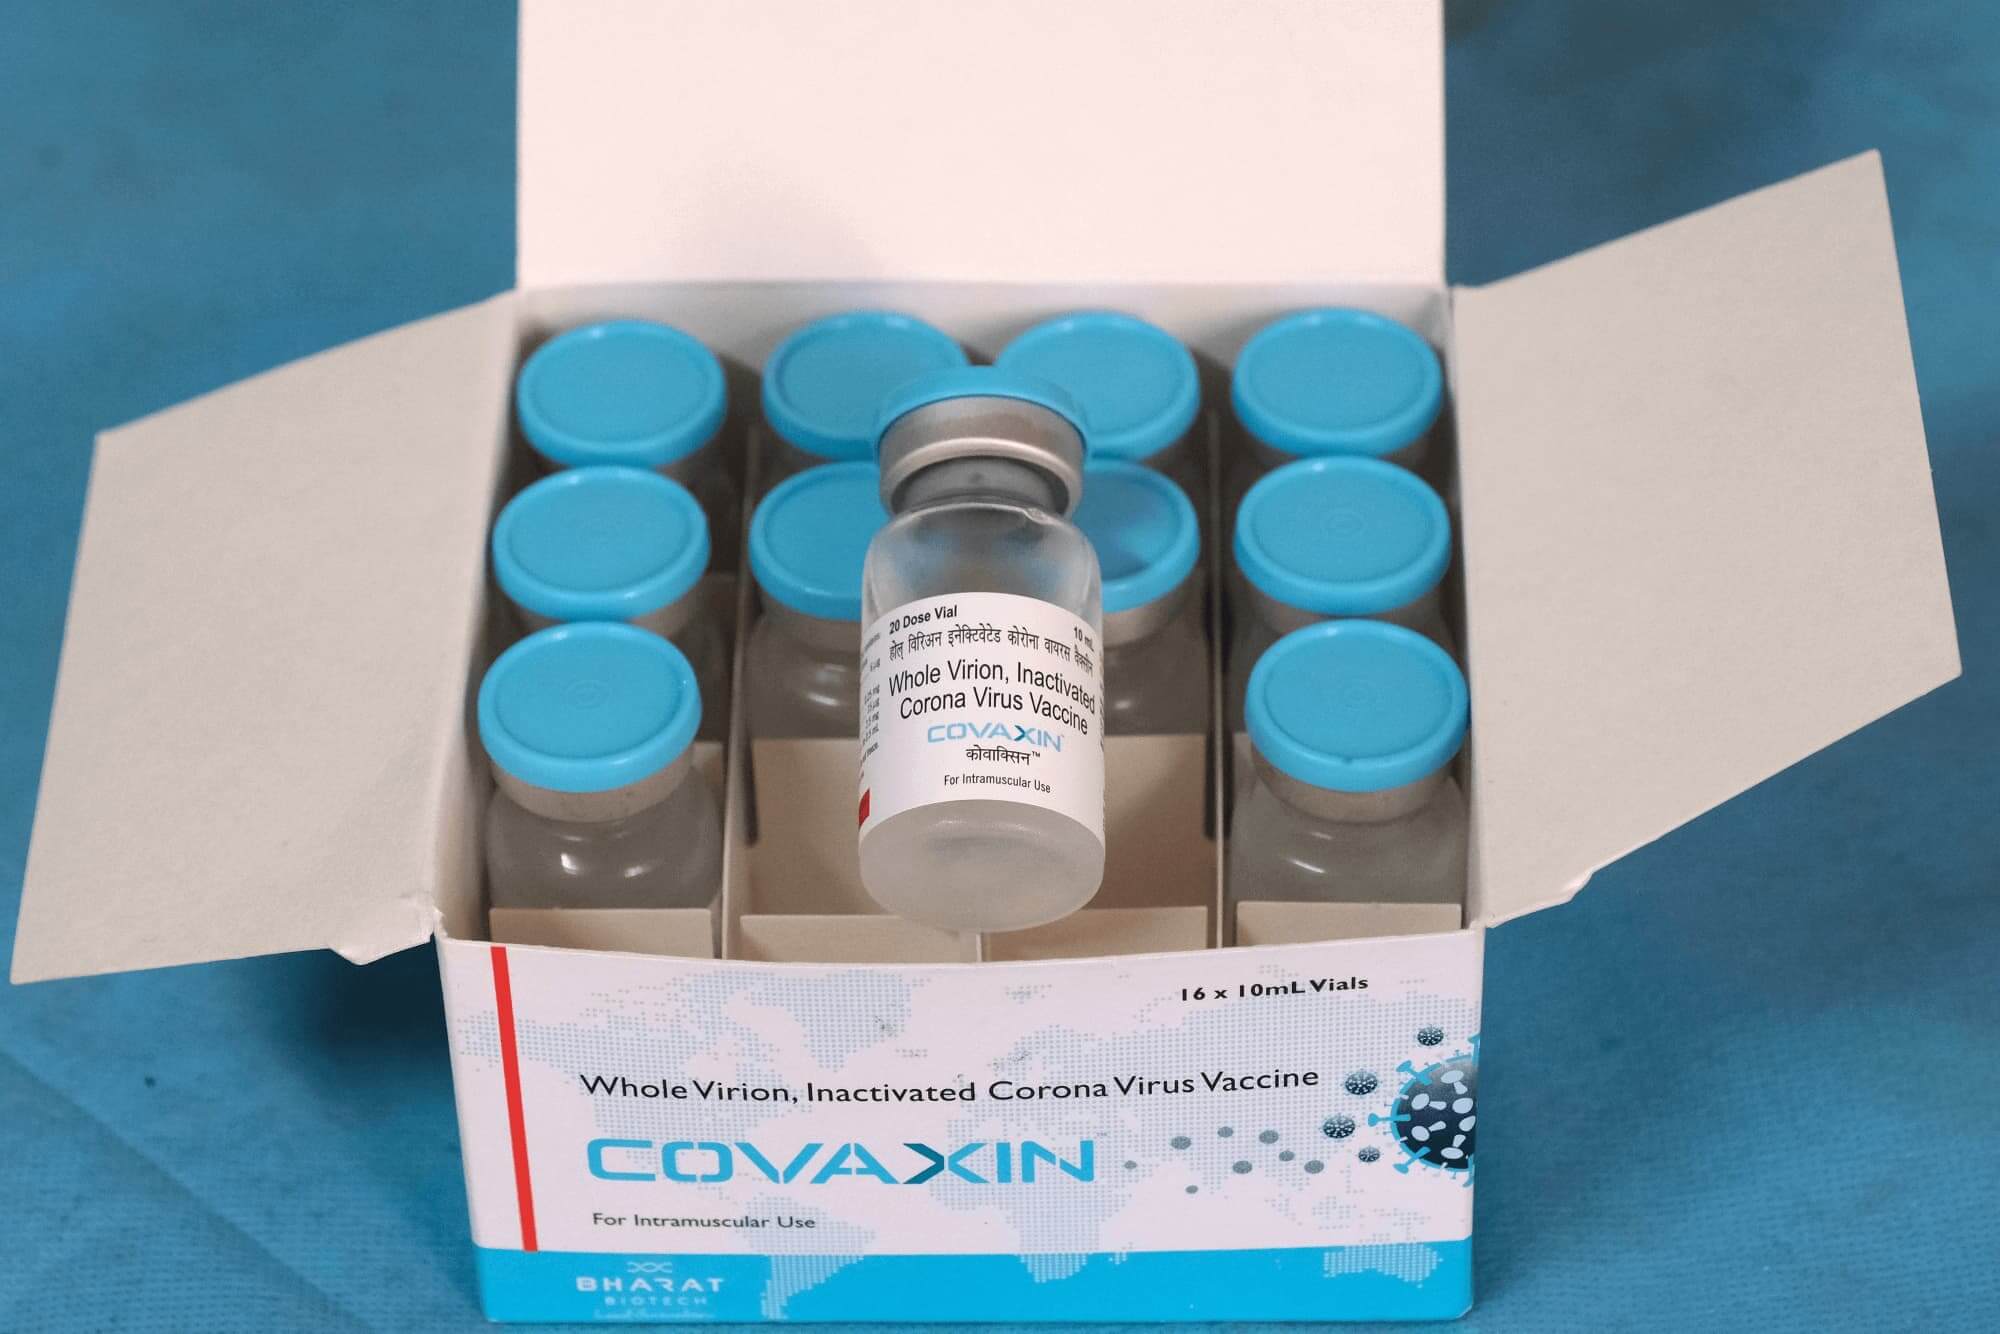 Covaxin